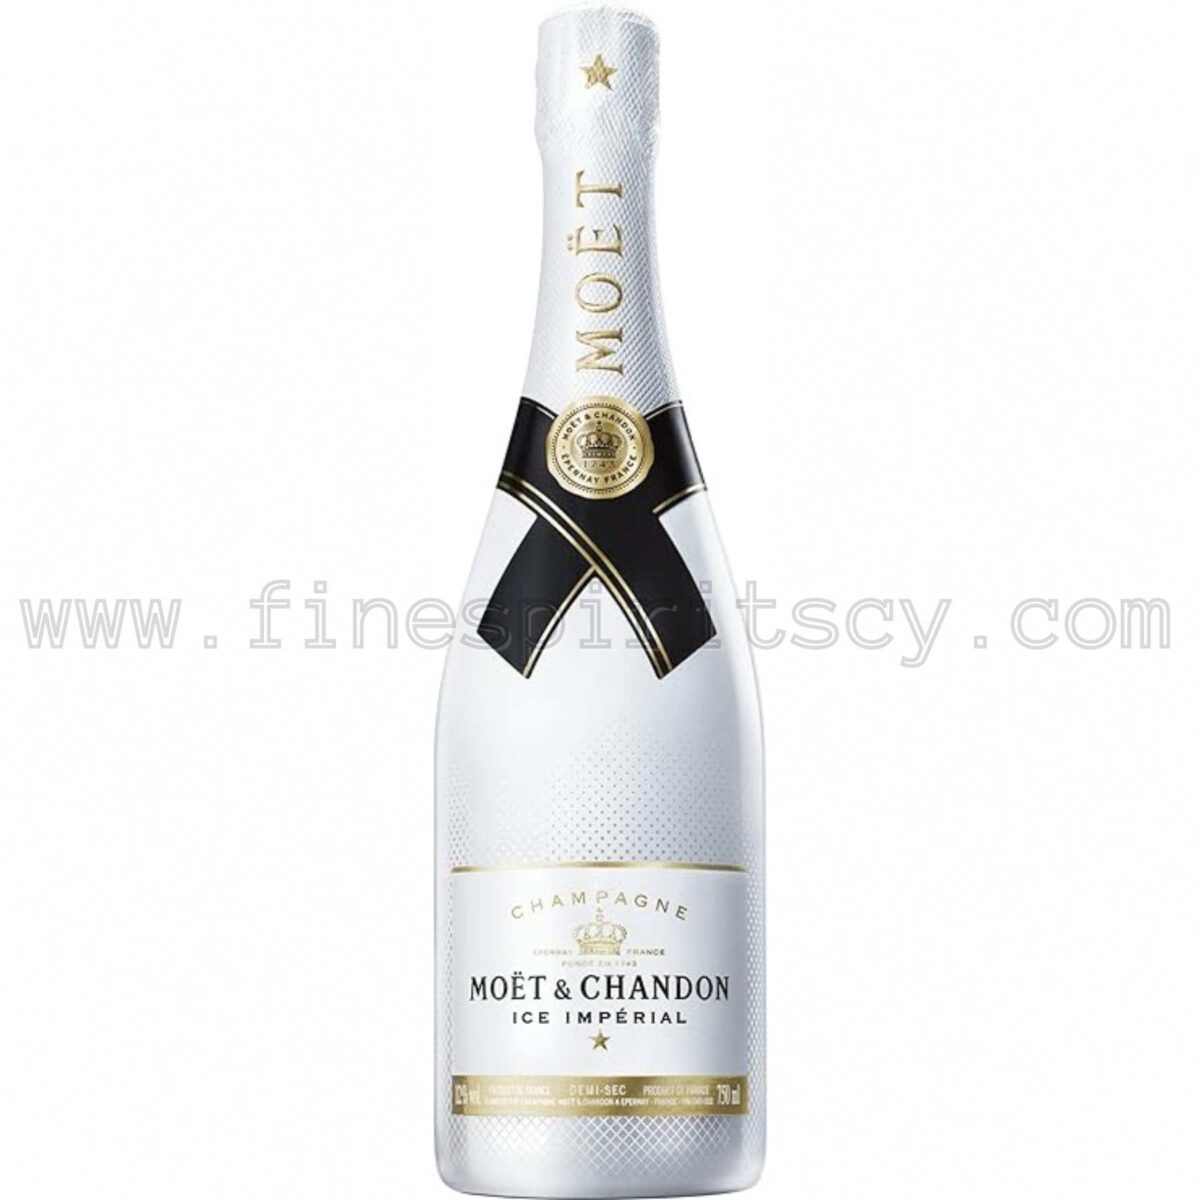 Moet Chandon CY Brut Ice Imperial 750ml 75cl 0.75L Price Champagne Demi Sec